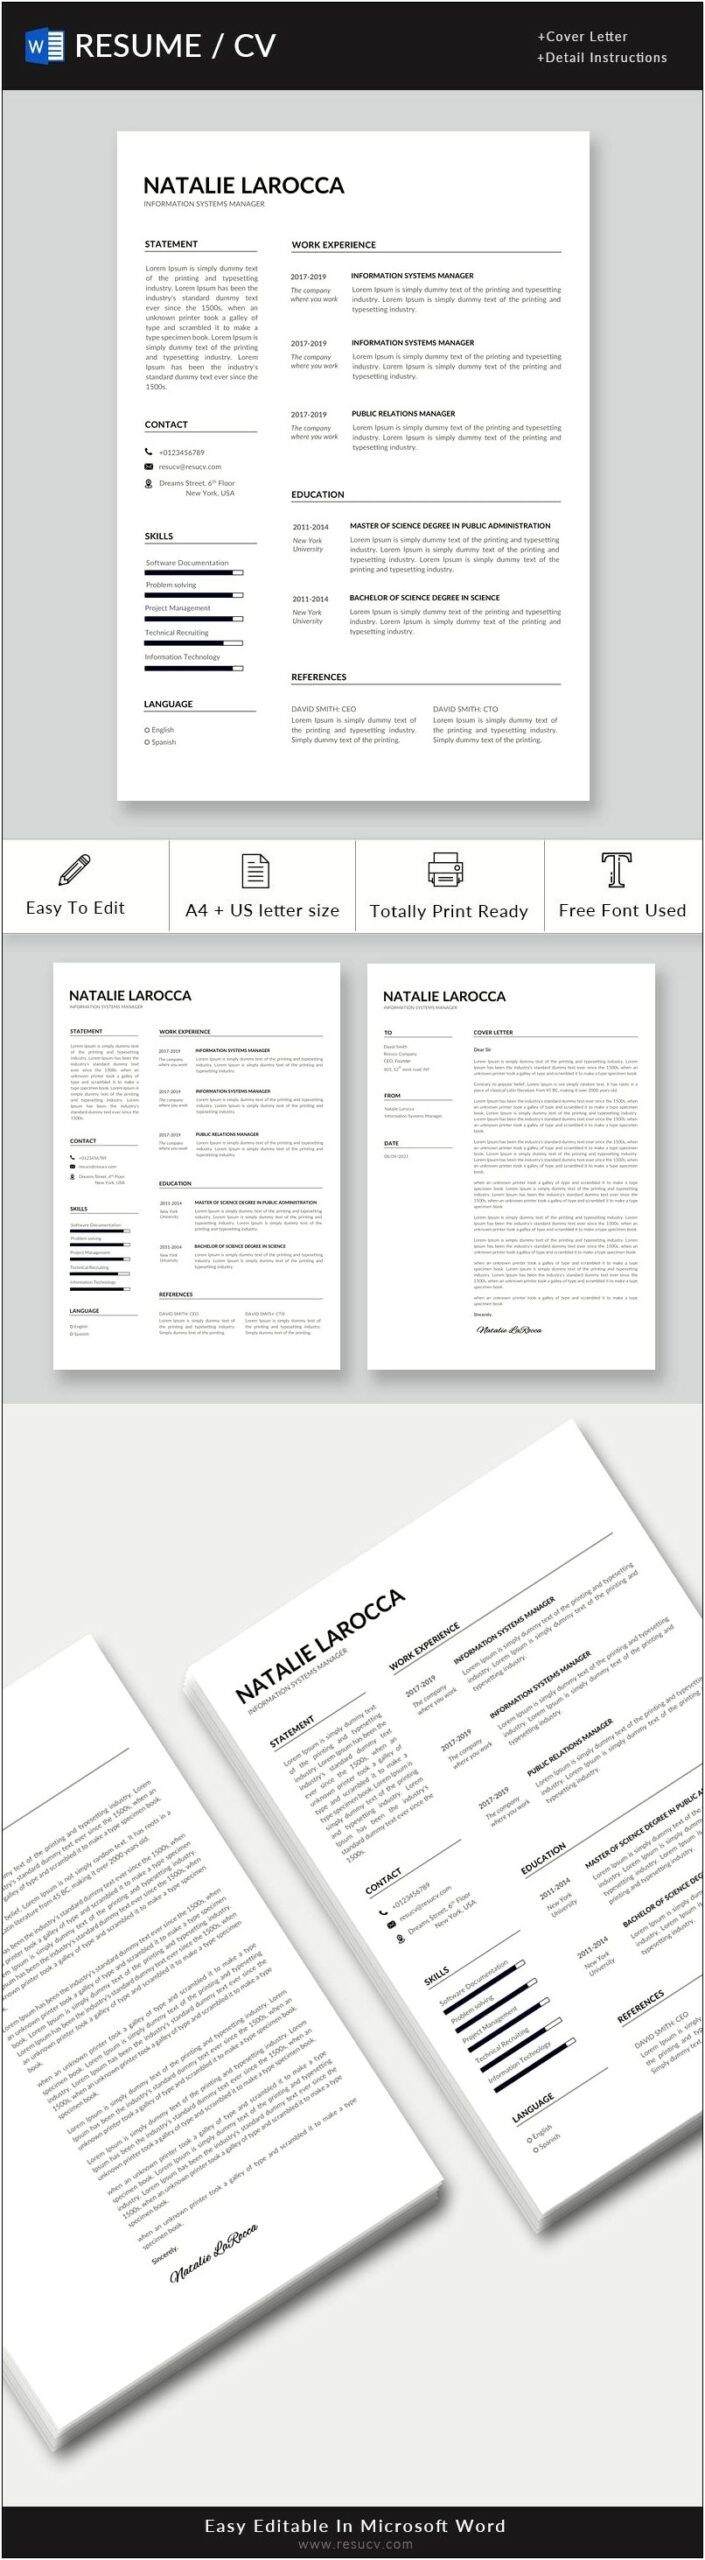 New Resume Format 2017 In Word